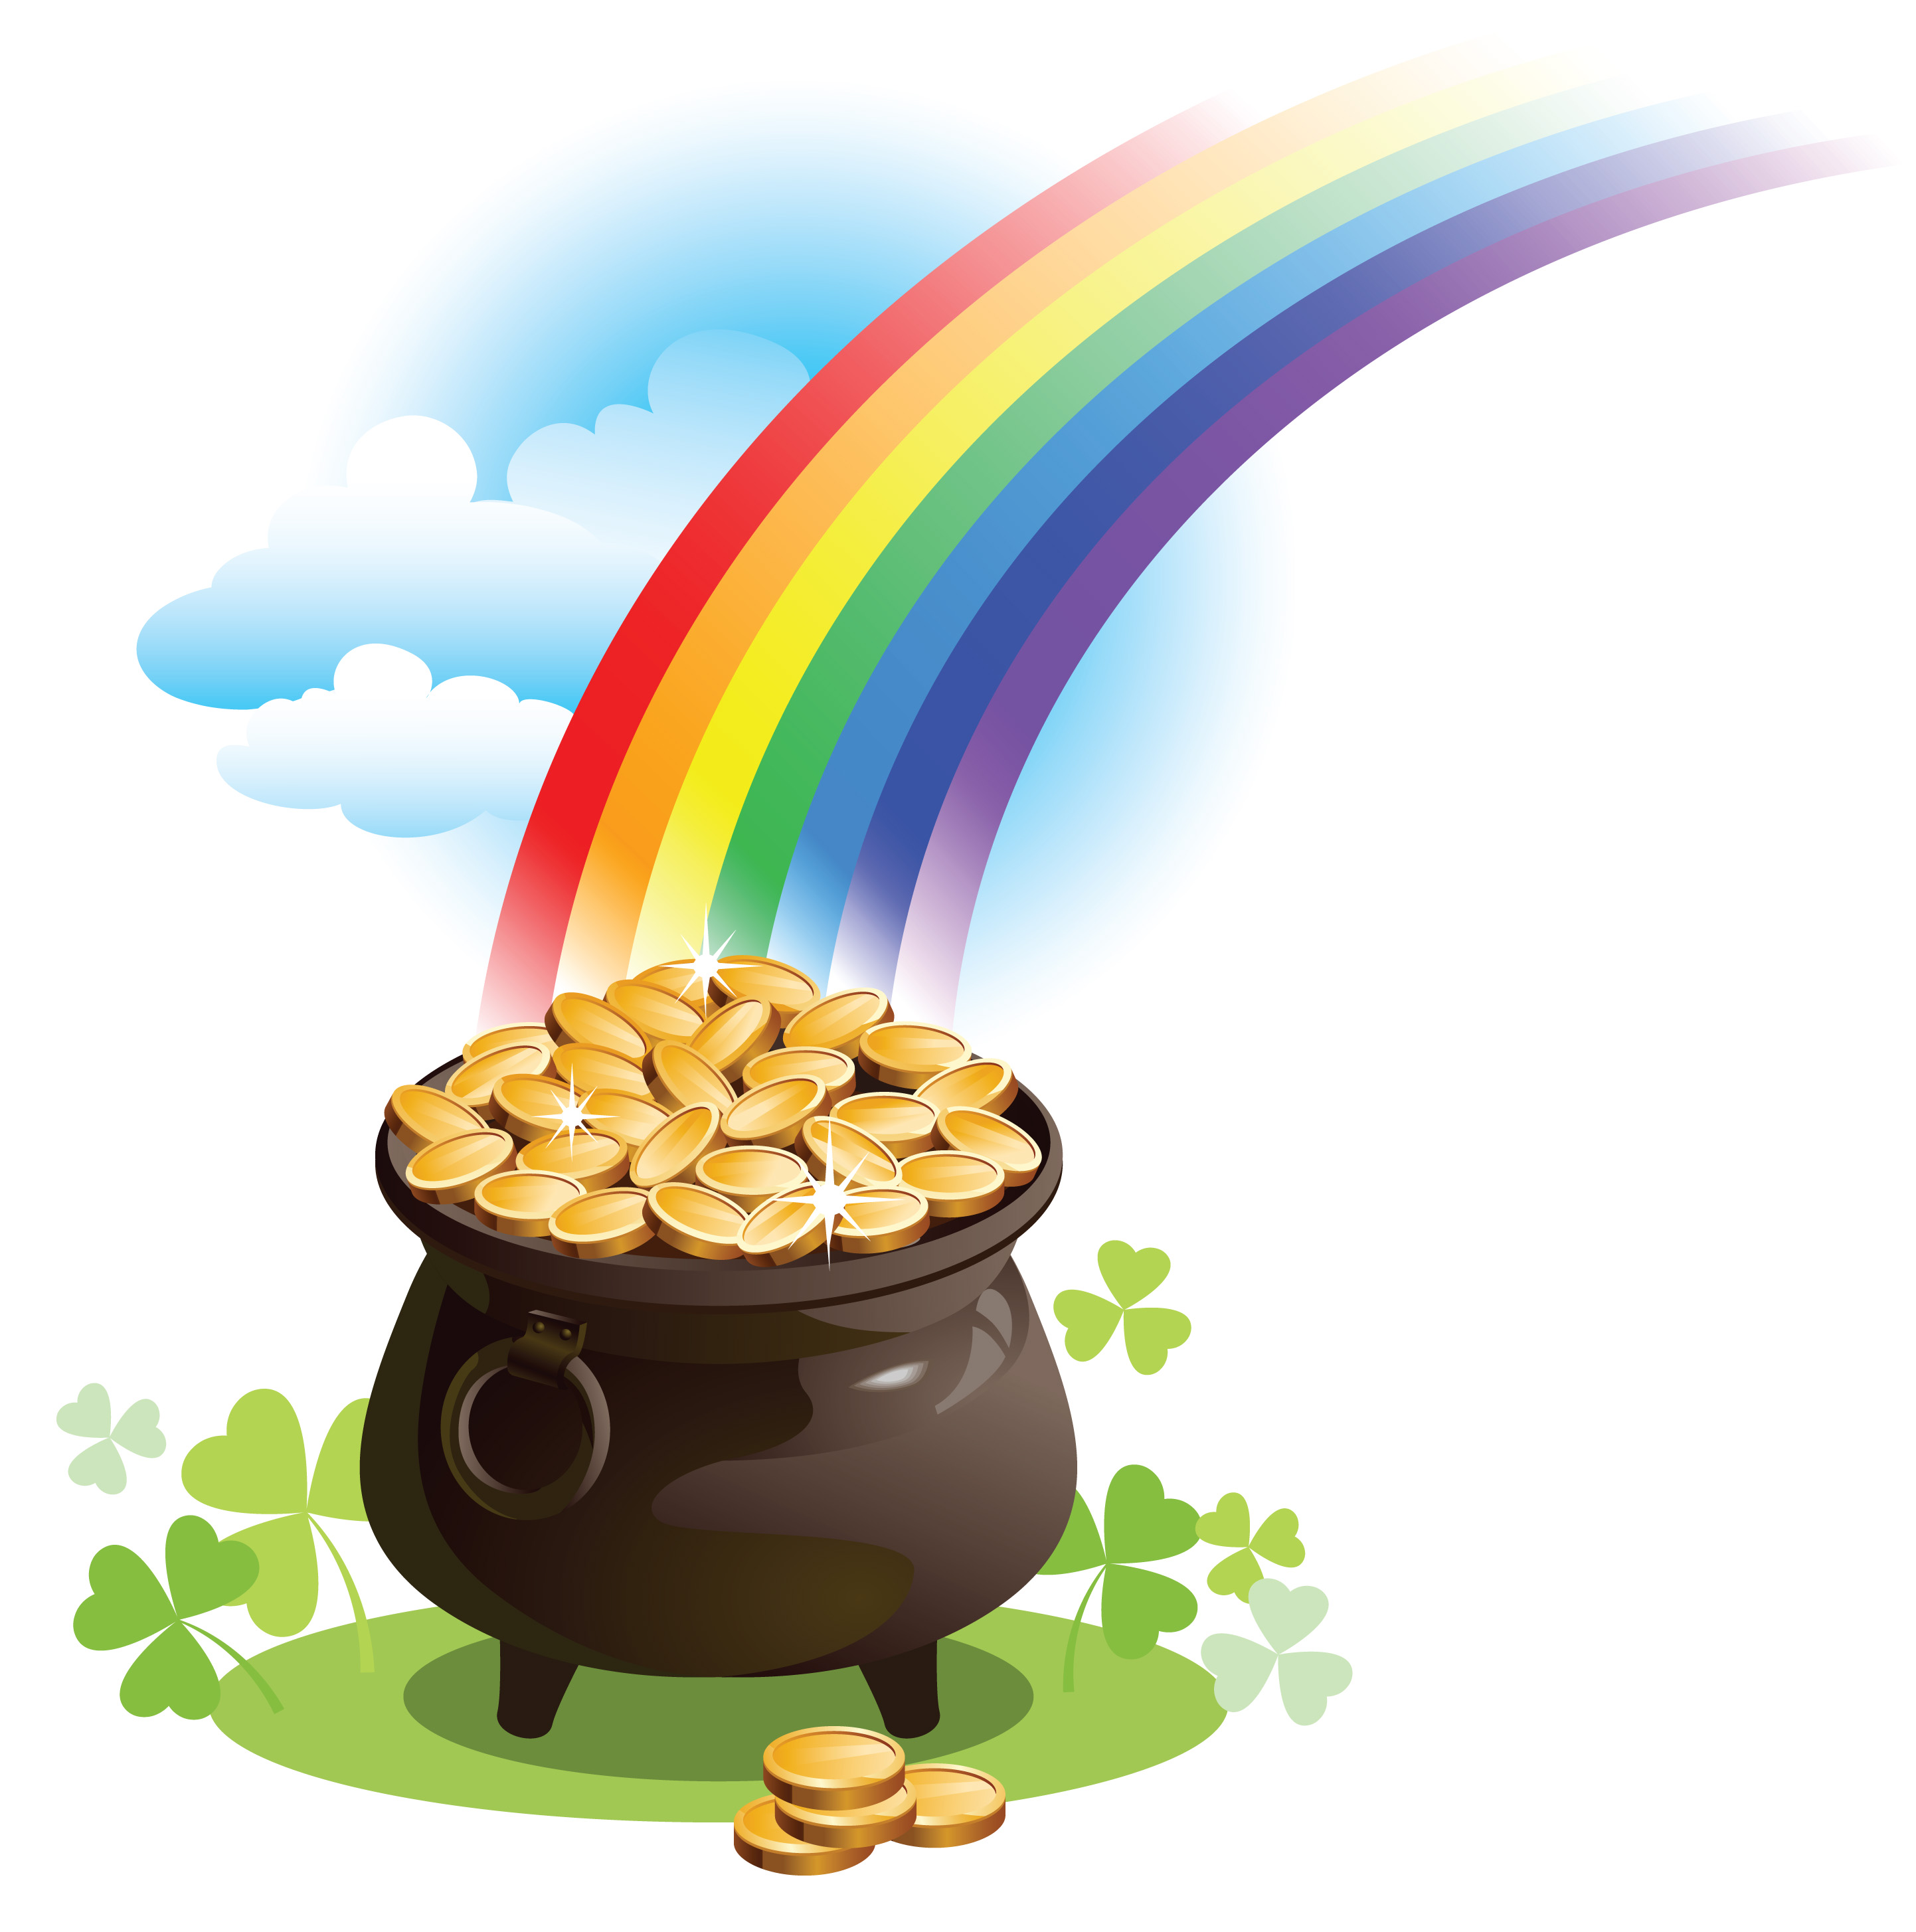 Pictures Of A Pot Of Gold - Cliparts.co